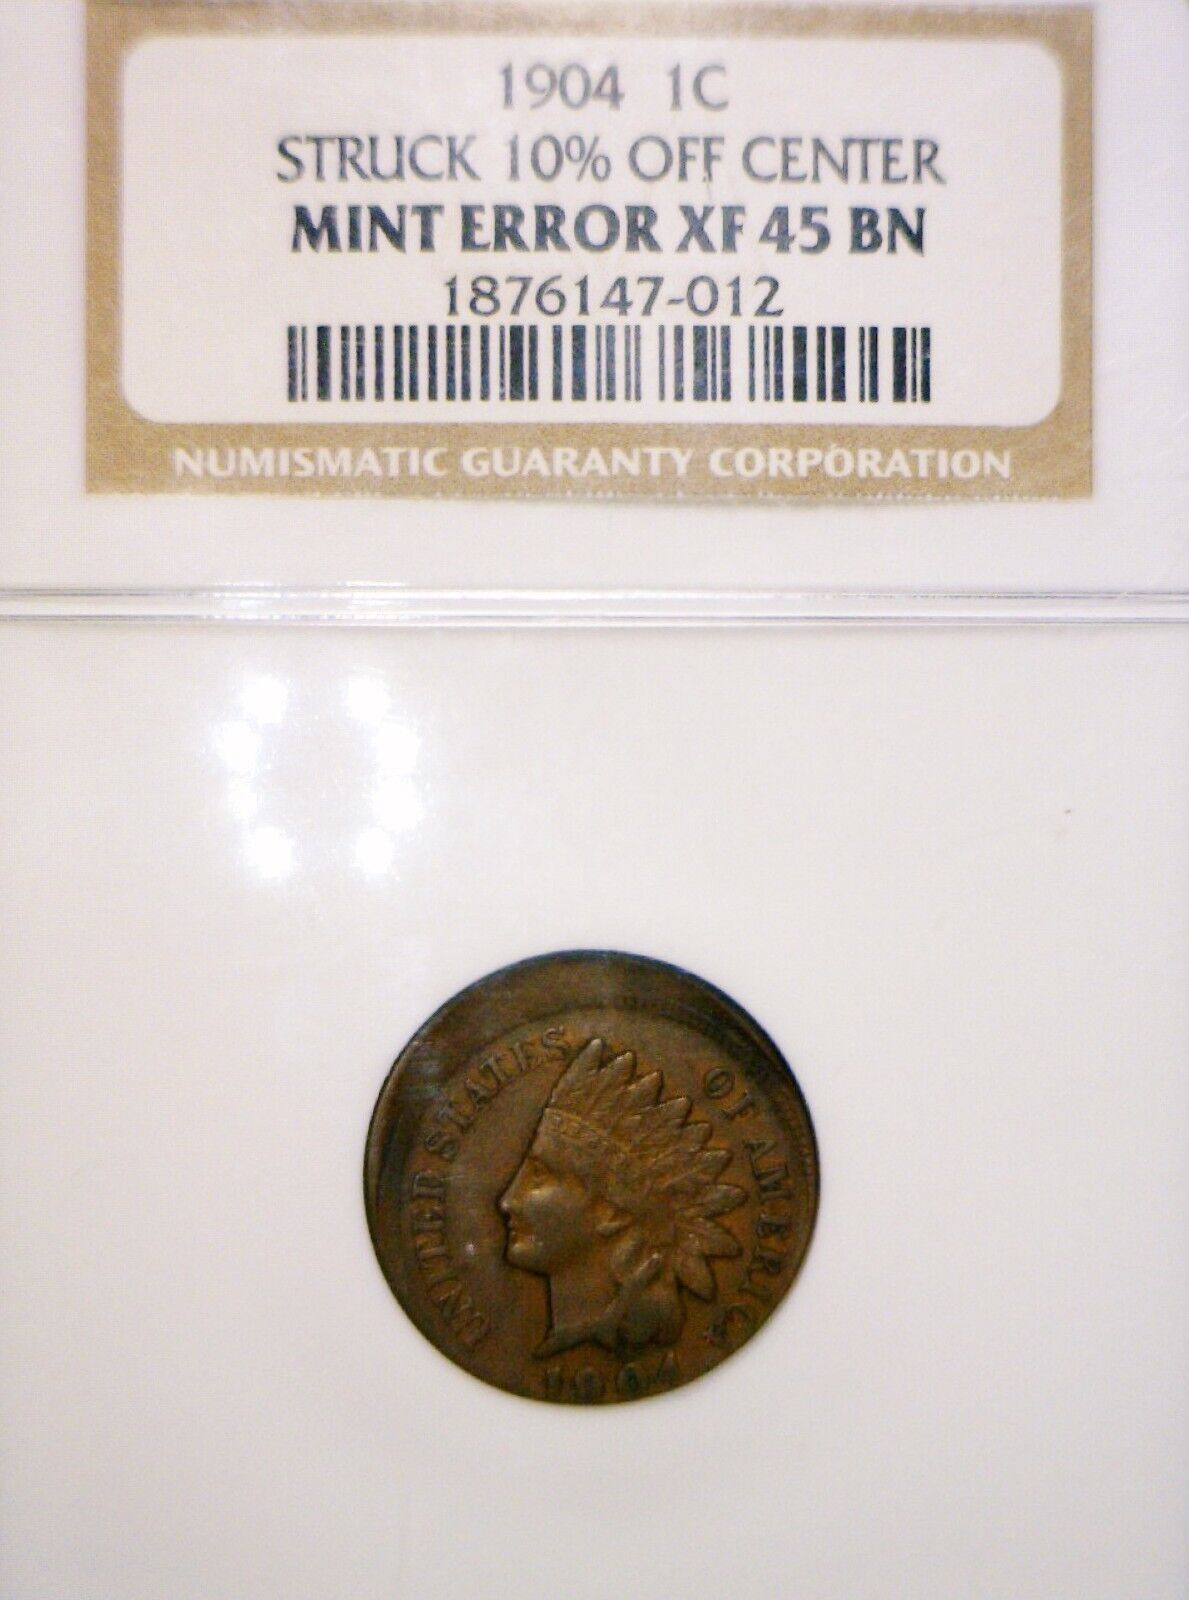 1904 Indian Head Penny Struck 10% Off-Centre